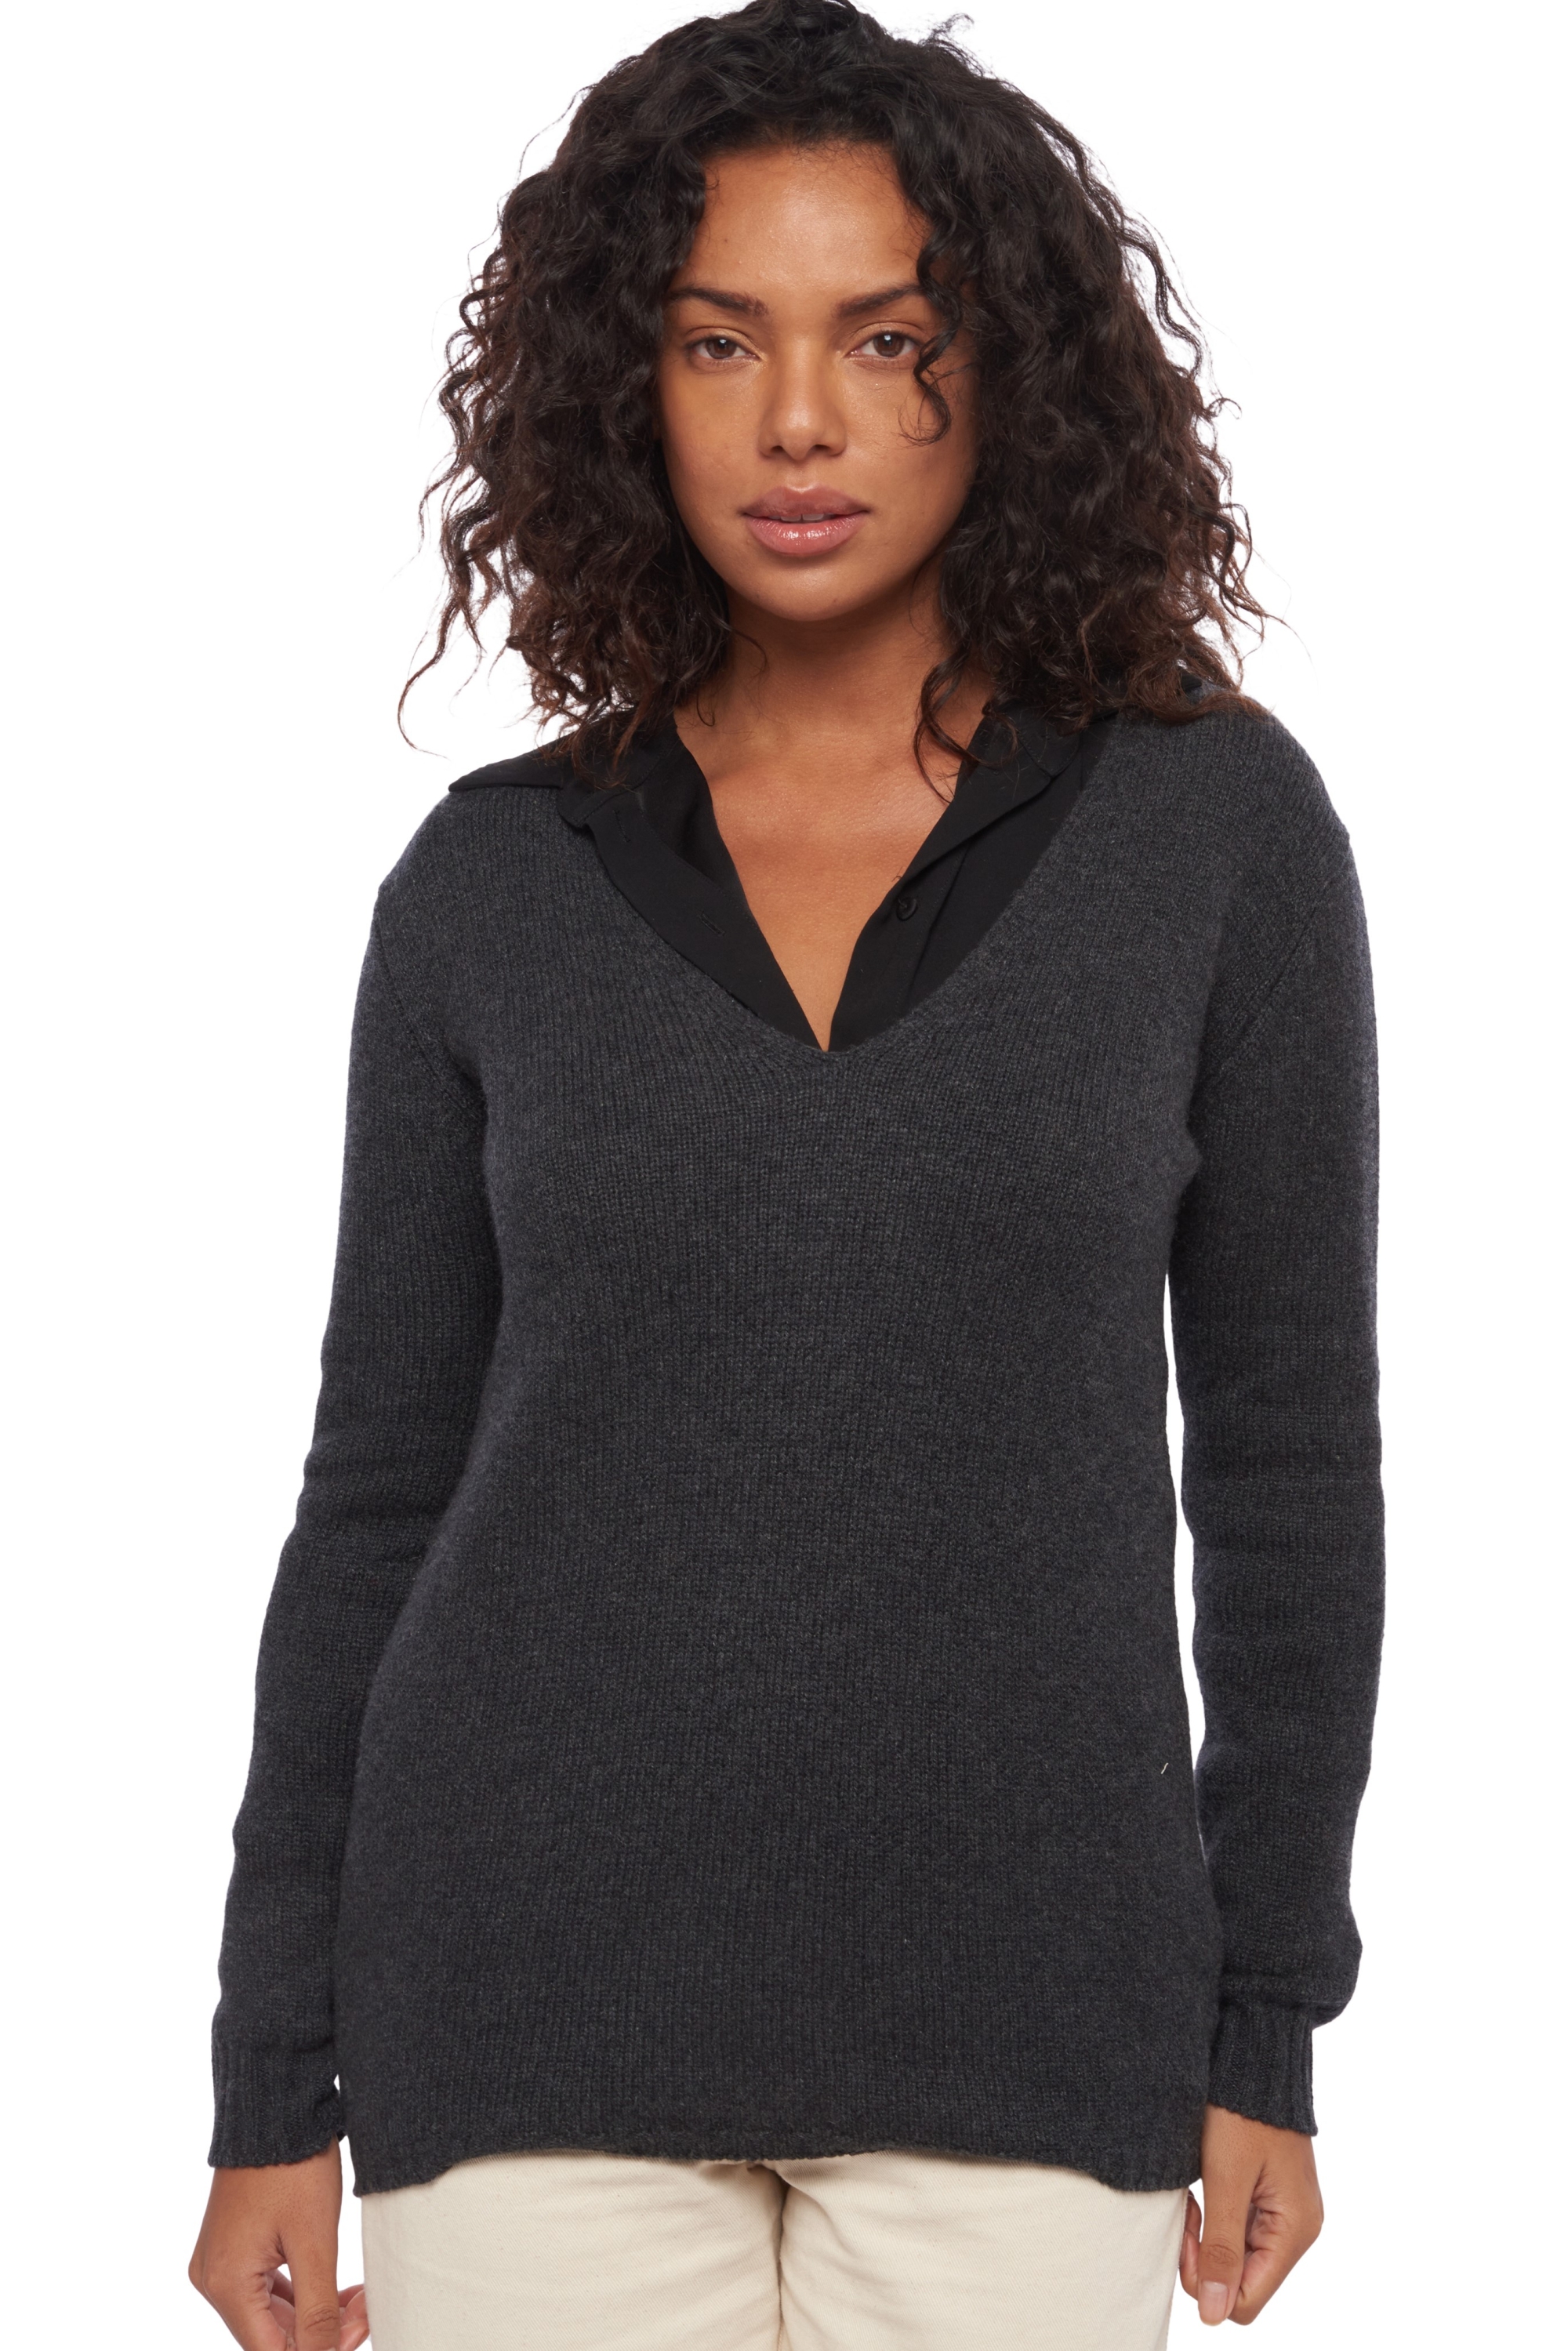 Cashmere ladies chunky sweater vanessa charcoal marl m